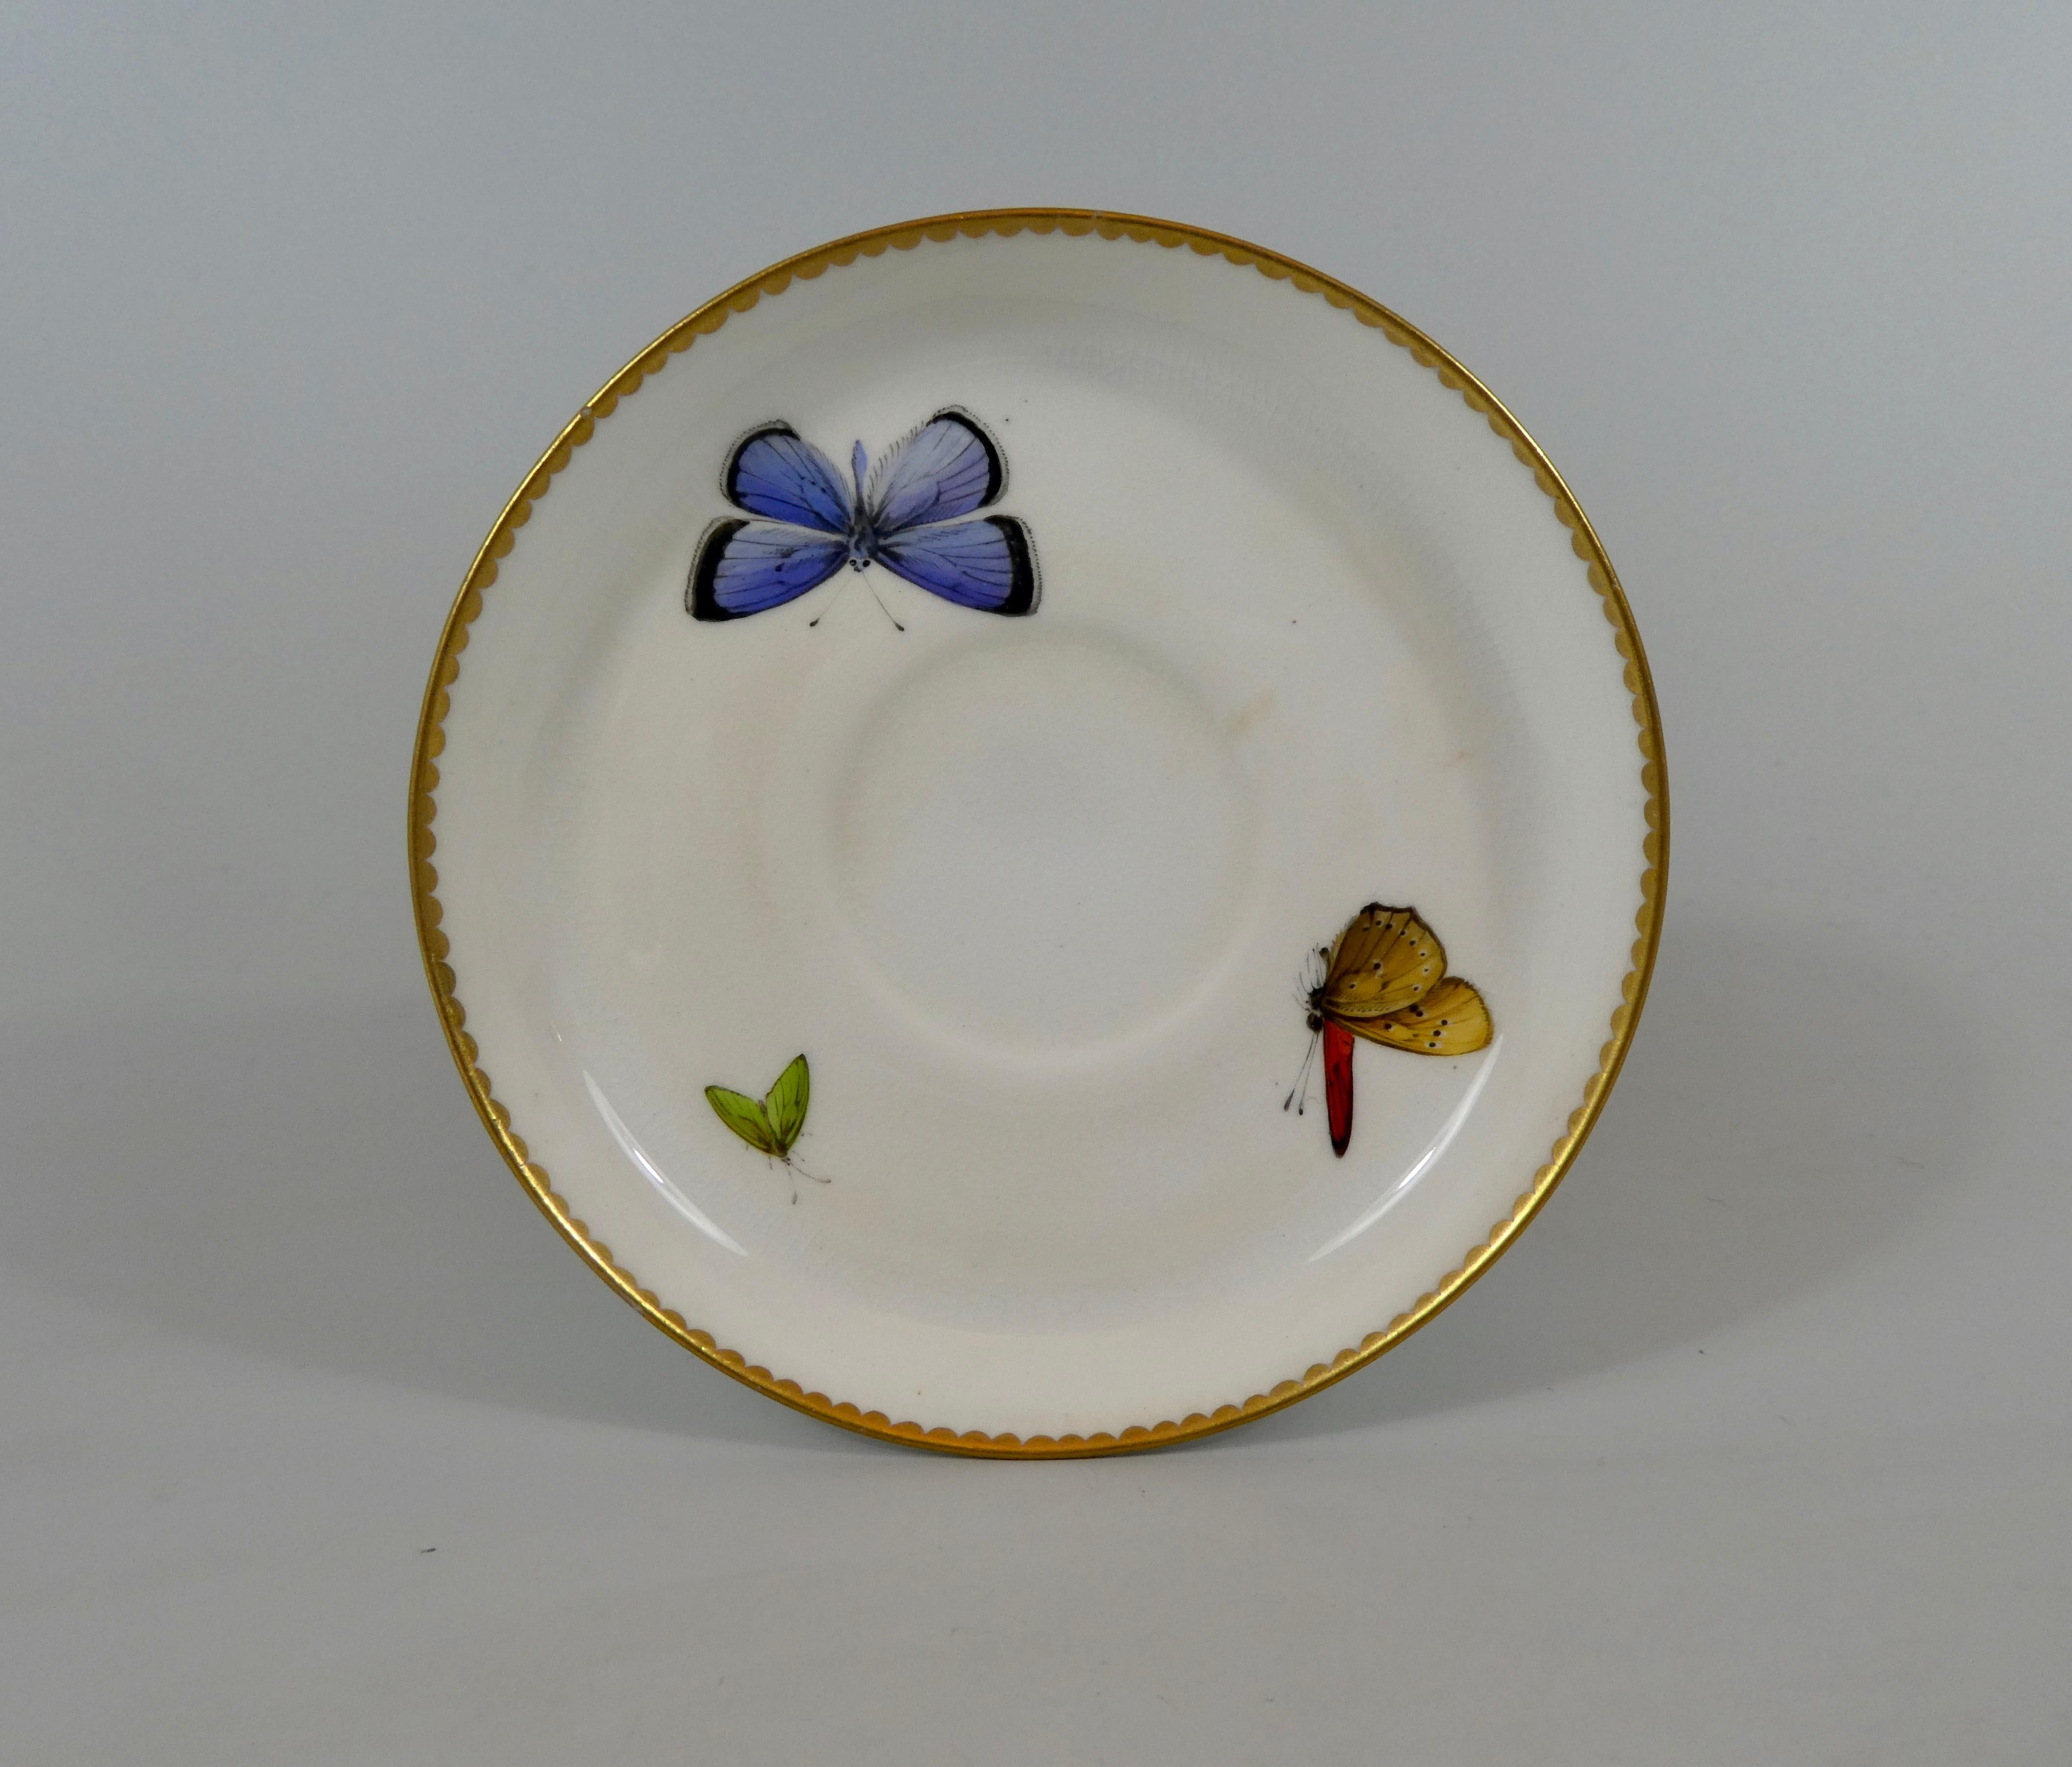 A rare royal Worcester ‘Butterfly’ porcelain cup and saucer, dated 1880. The cup modelled with a large butterfly handle, beautifully hand painted in enamels, and gilt. Both the cup and saucer, hand painted with further butterflies, within a gilt